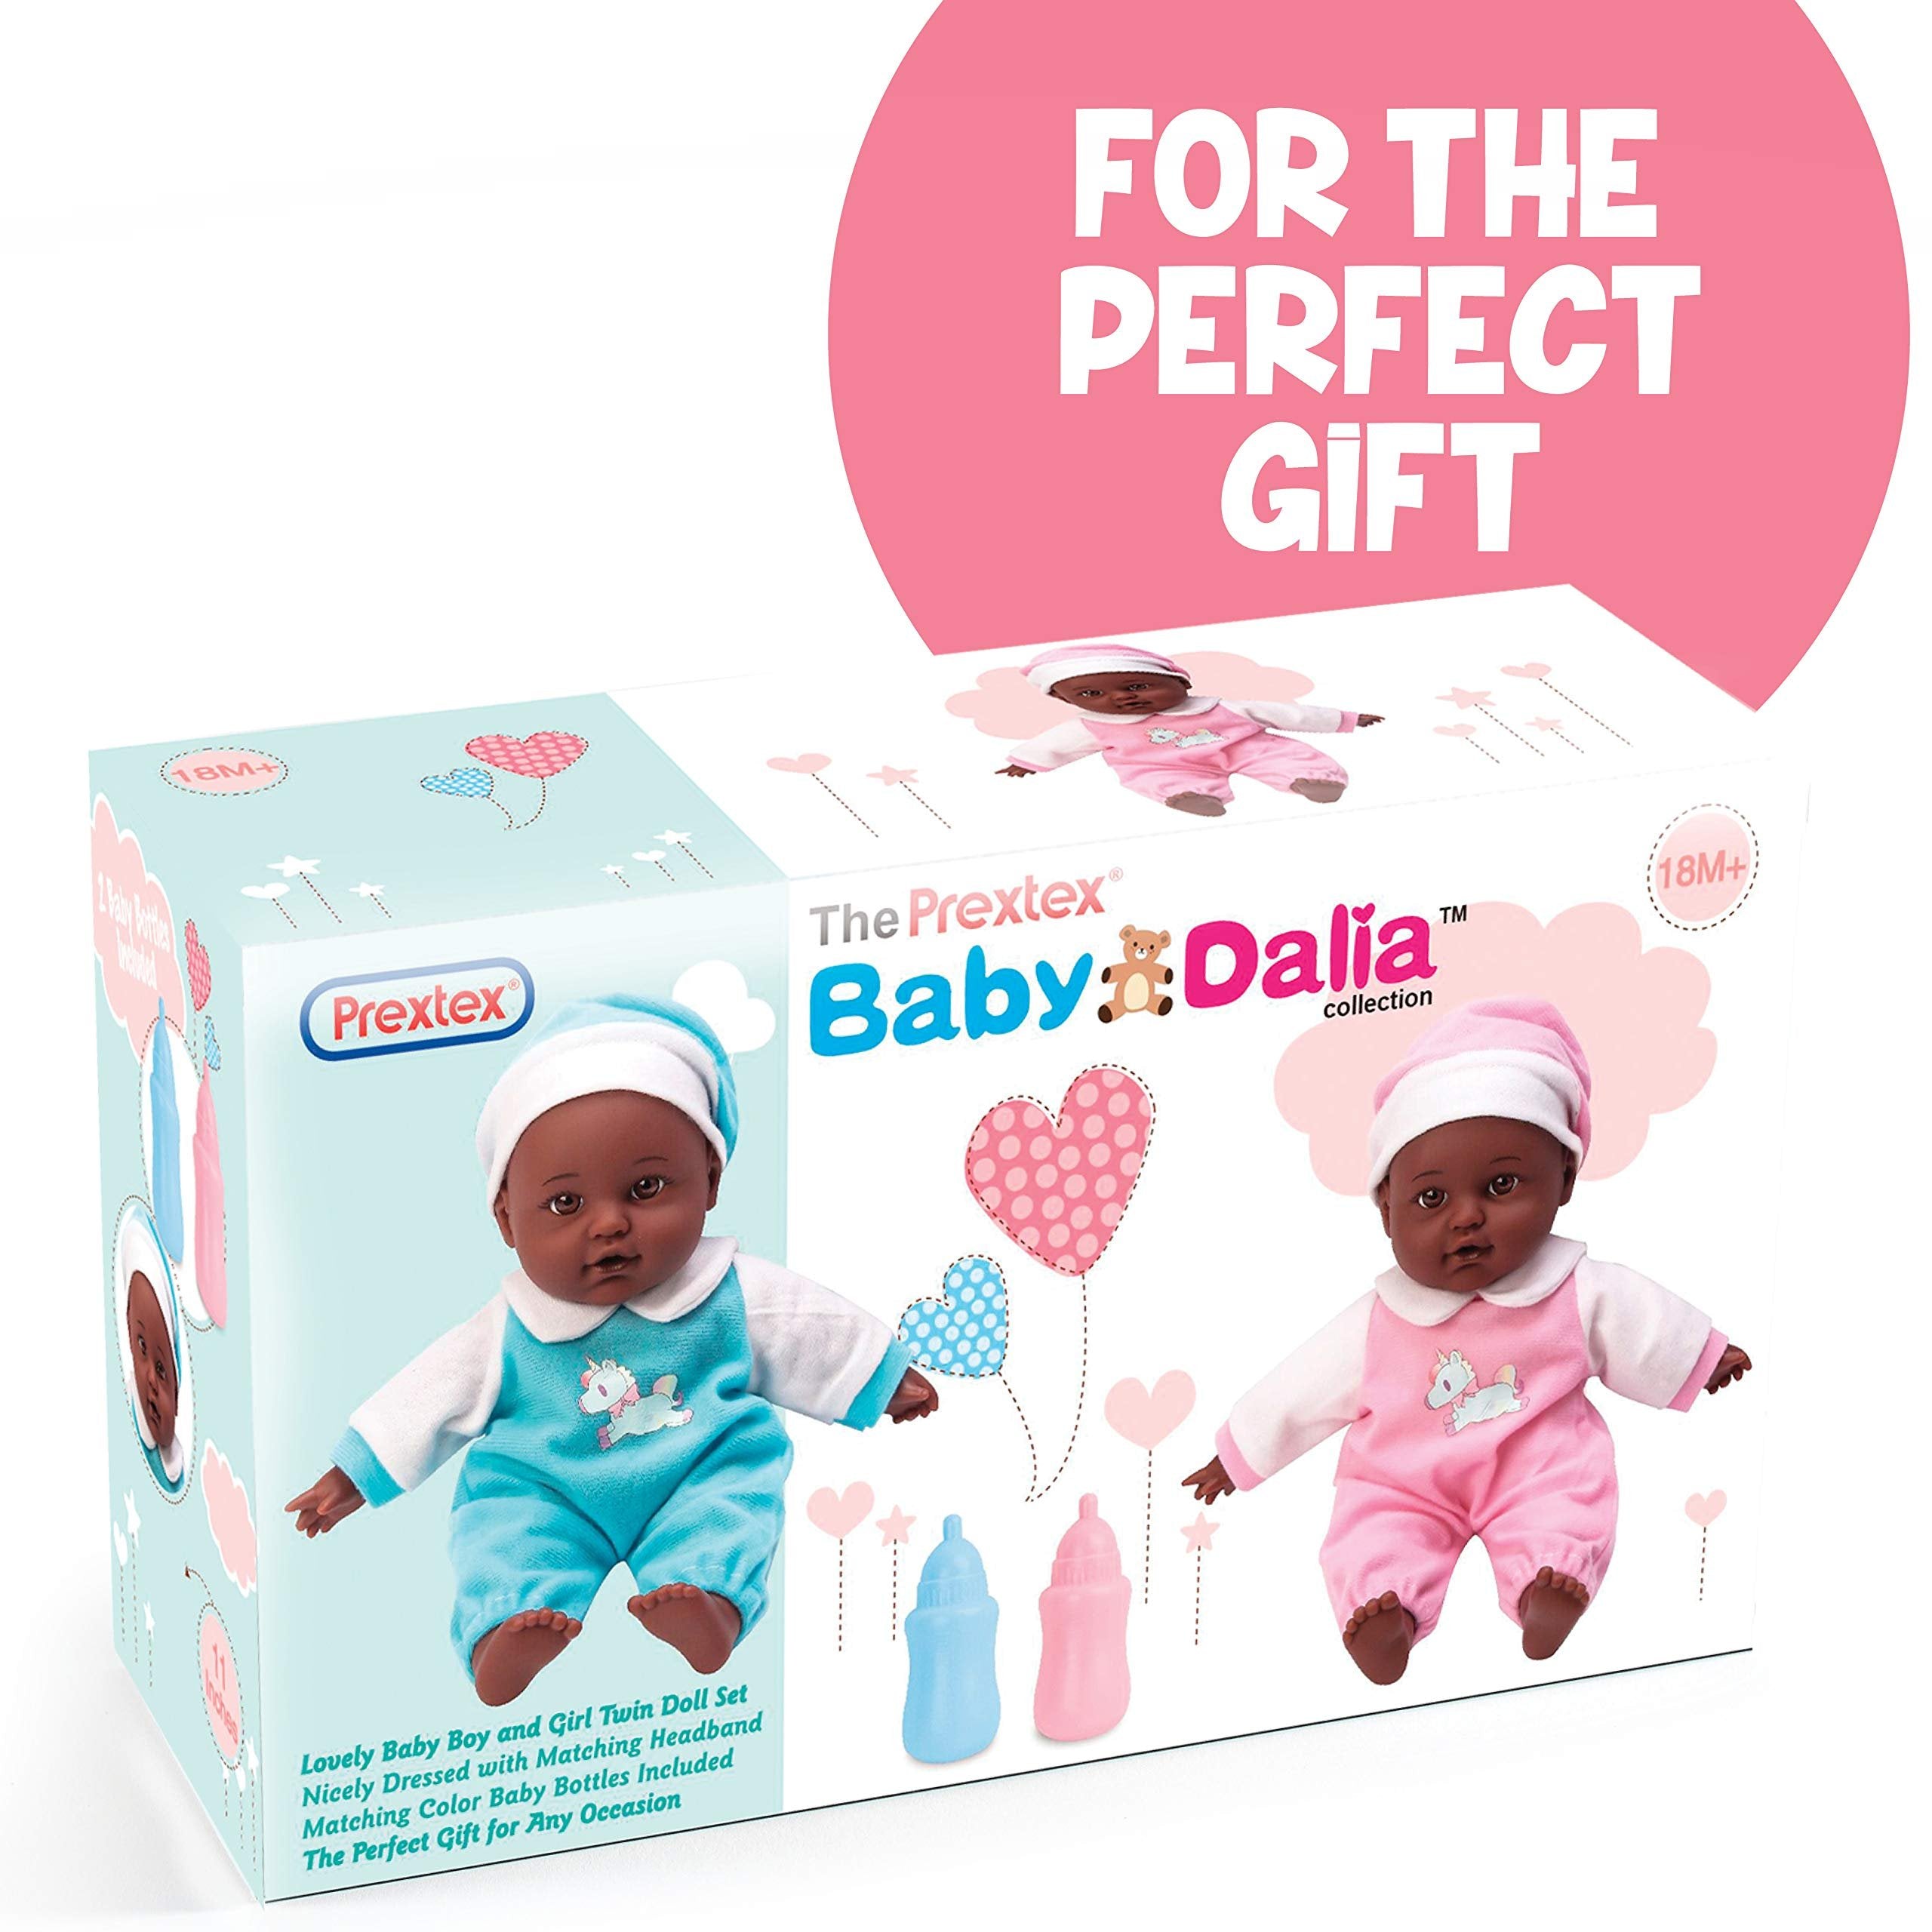 PREXTEX 11" Twin Black Baby Dolls Set | African American Baby Doll Toy | Realistic Newborn Doll | Small Twin Dolls for Toddler, Kid, Baby Boy&Girl | Gift Box Set, Stuff, Kit, Accessories, Clothes